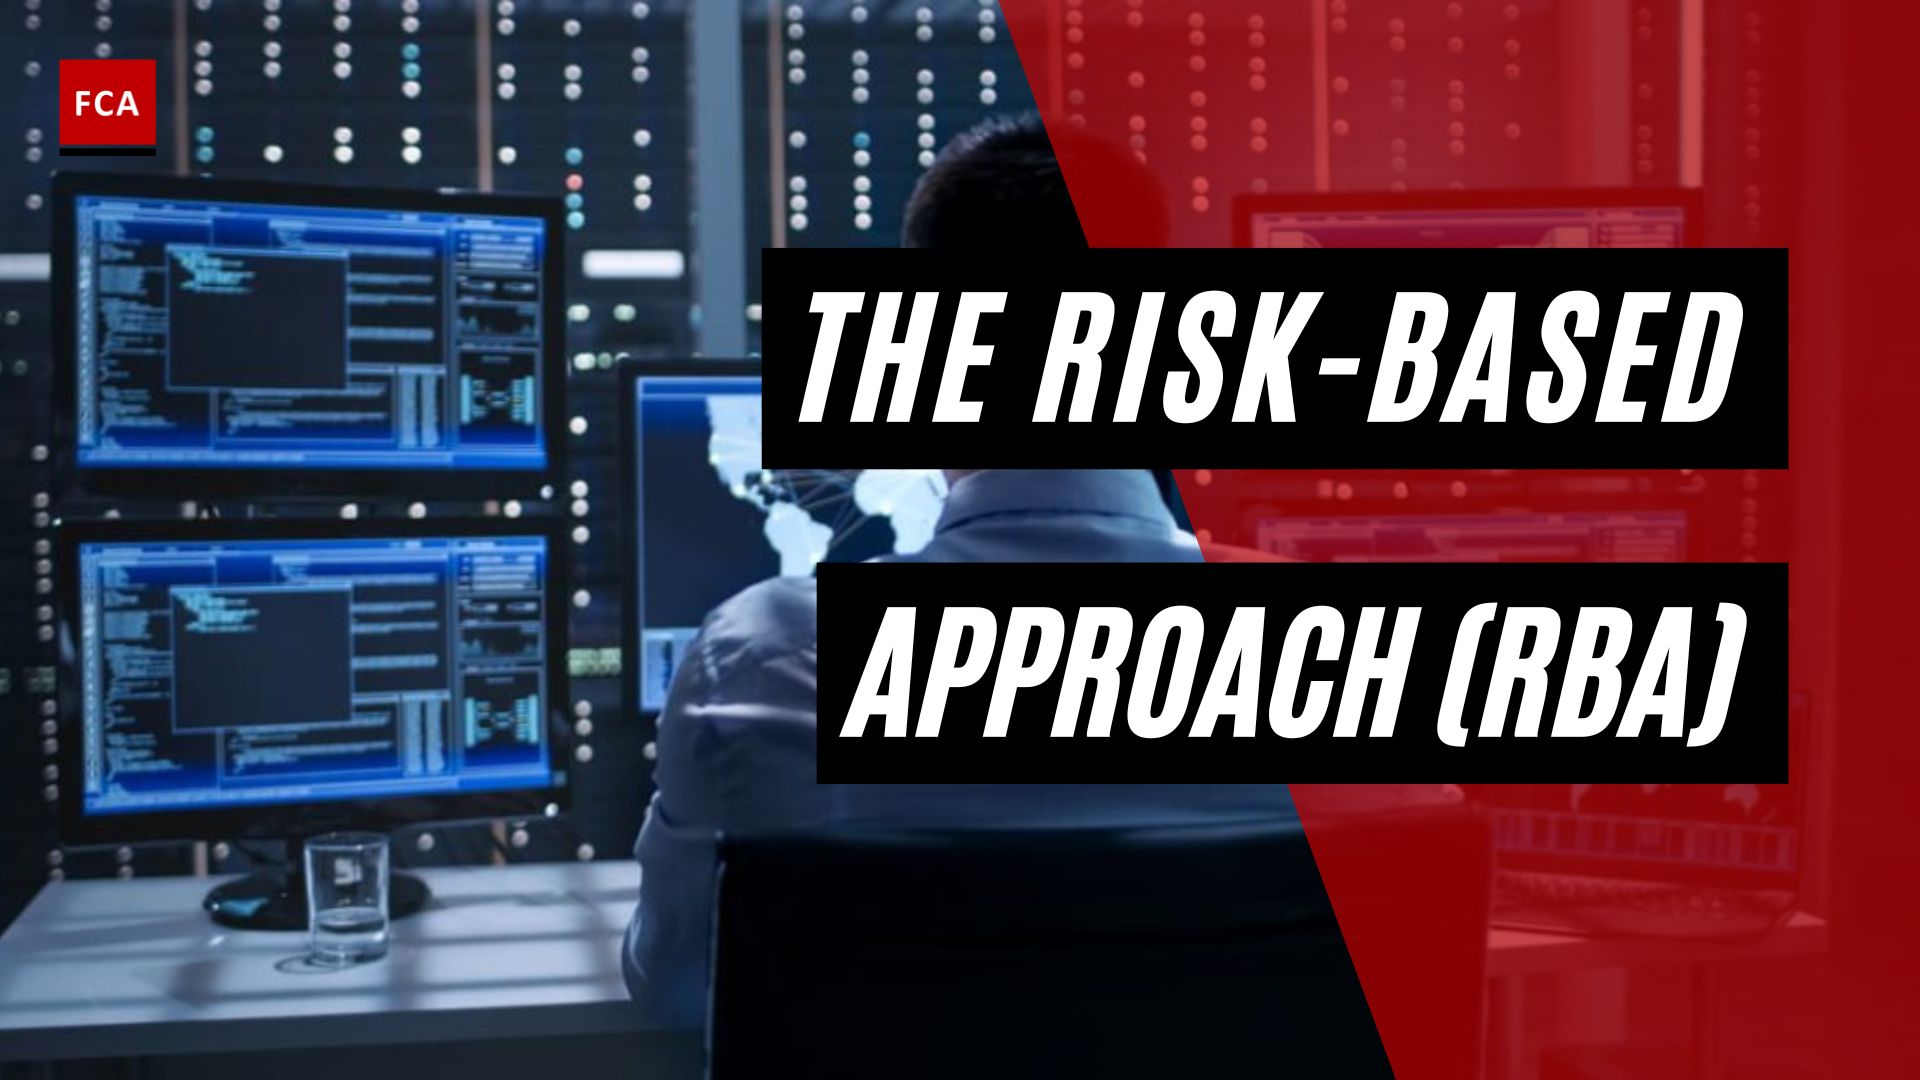 The Risk-Based Approach